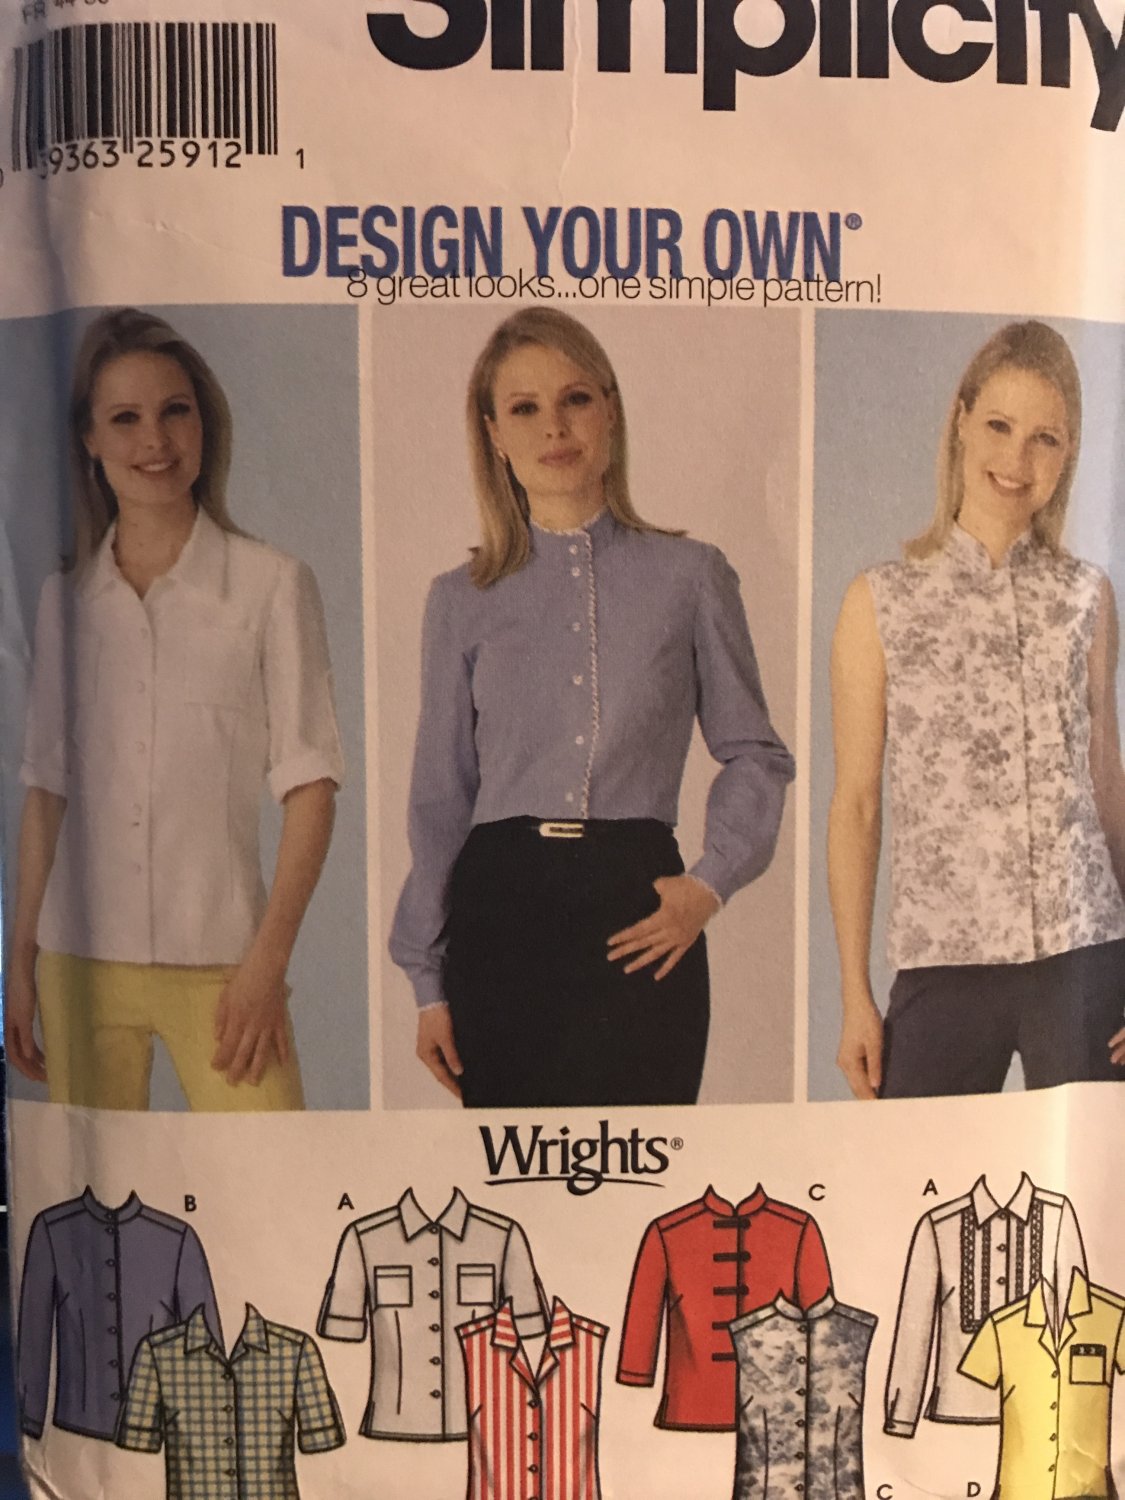 Simplicity 5963 Design your own Shirt plus size sewing Pattern size 16 18 20 22